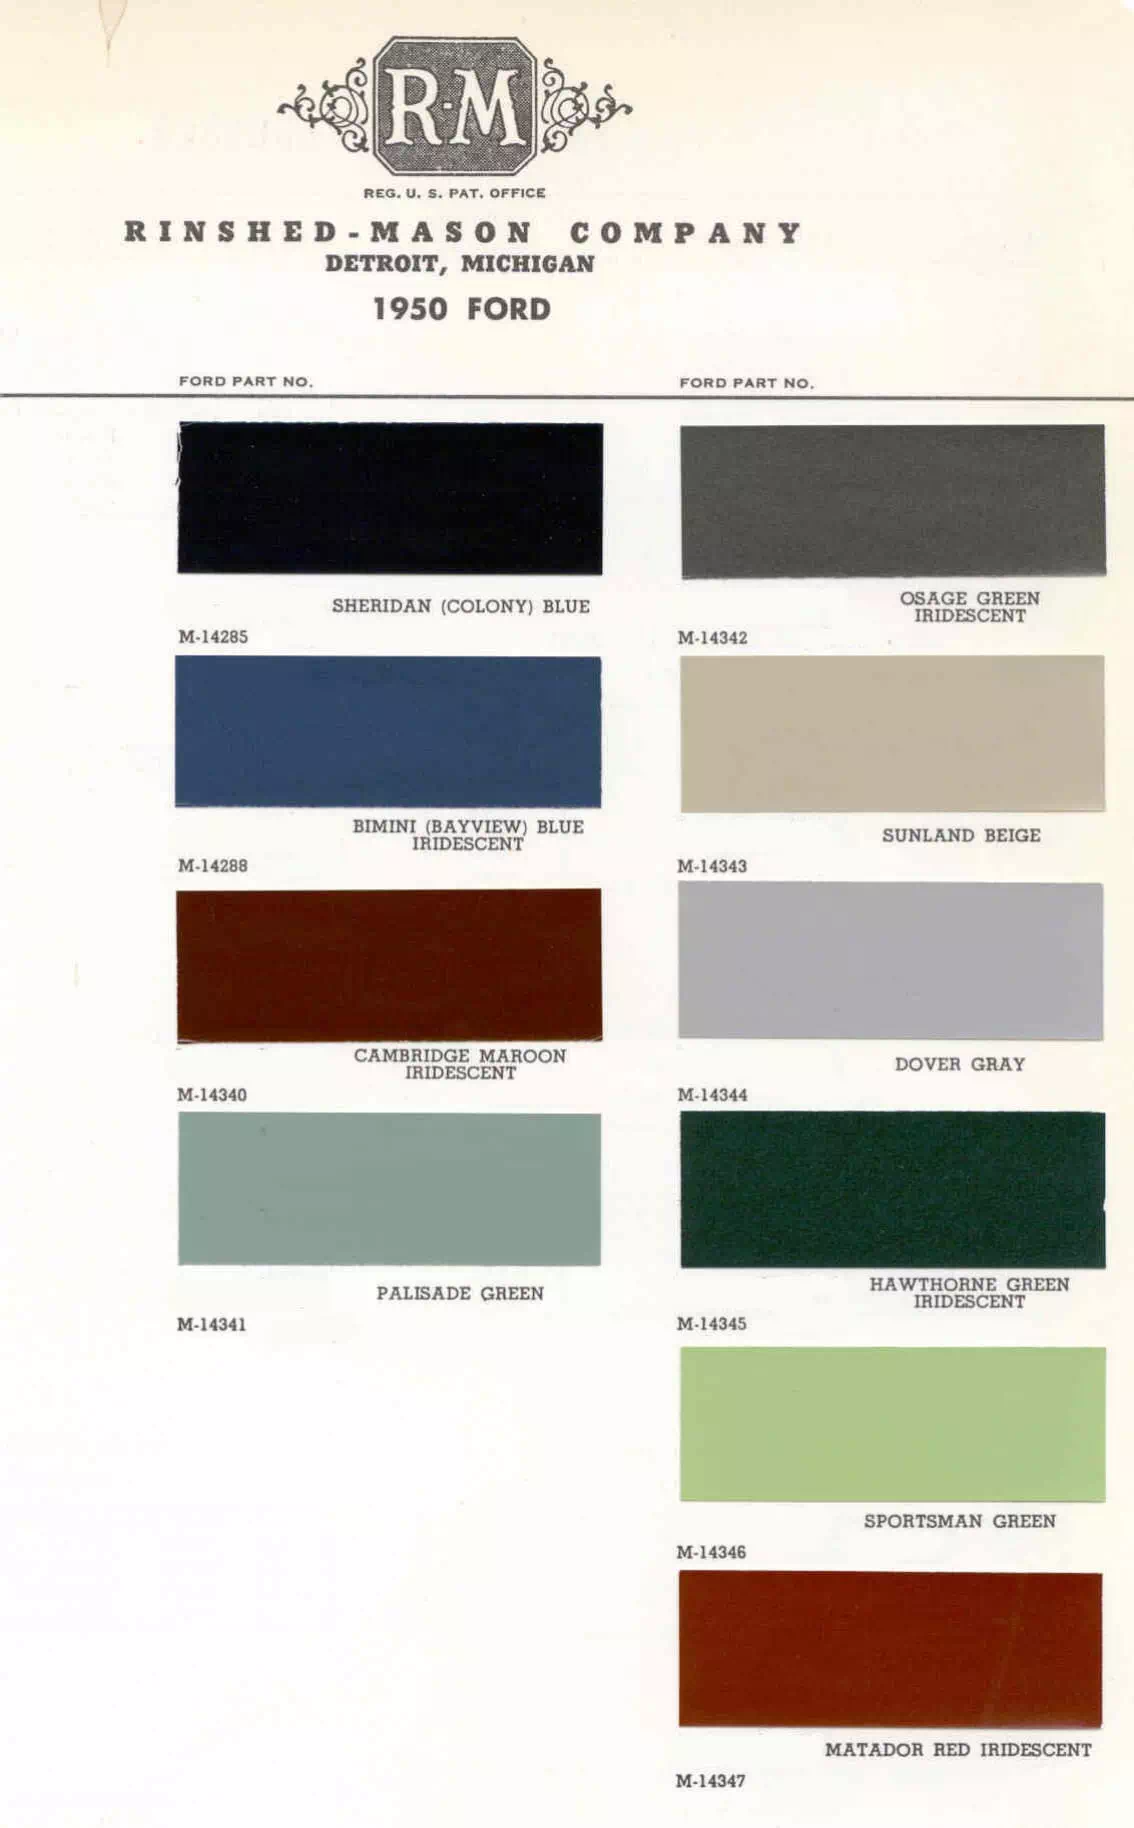 exterior colors, thier codes, and example swatches used on the exterior of the vehicles in 1950